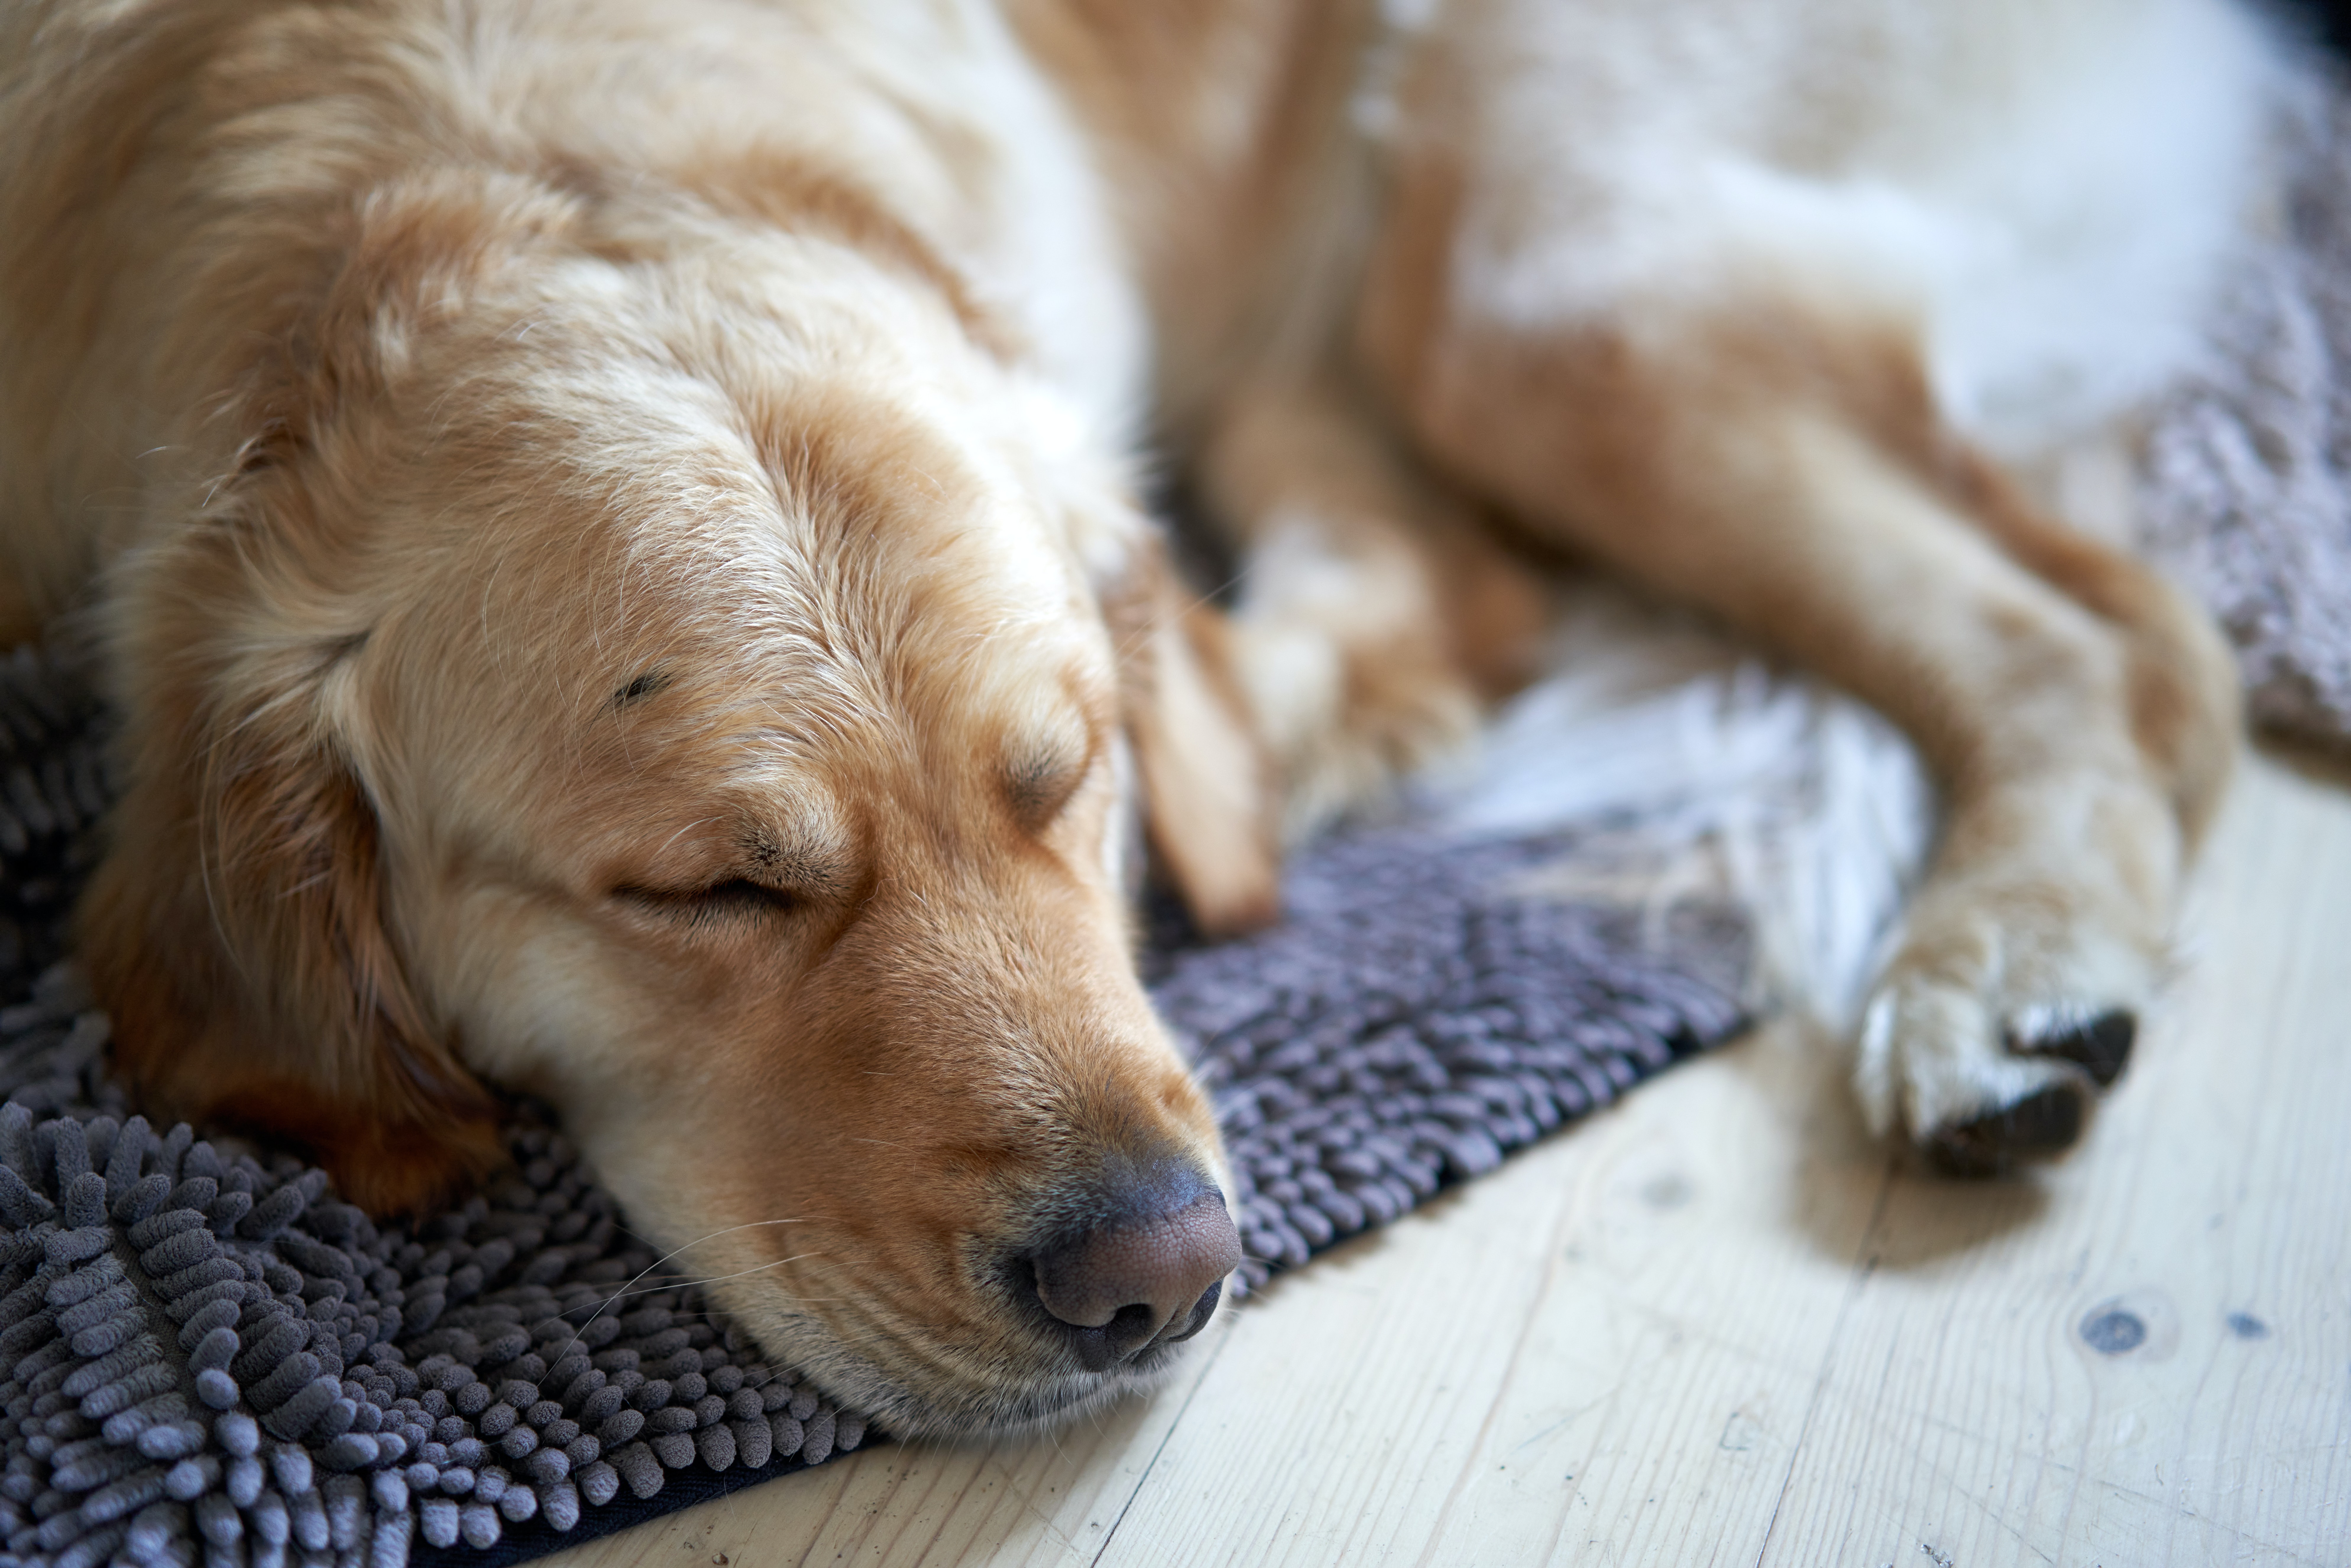 Planning Your Pet’s End-of-Life Care